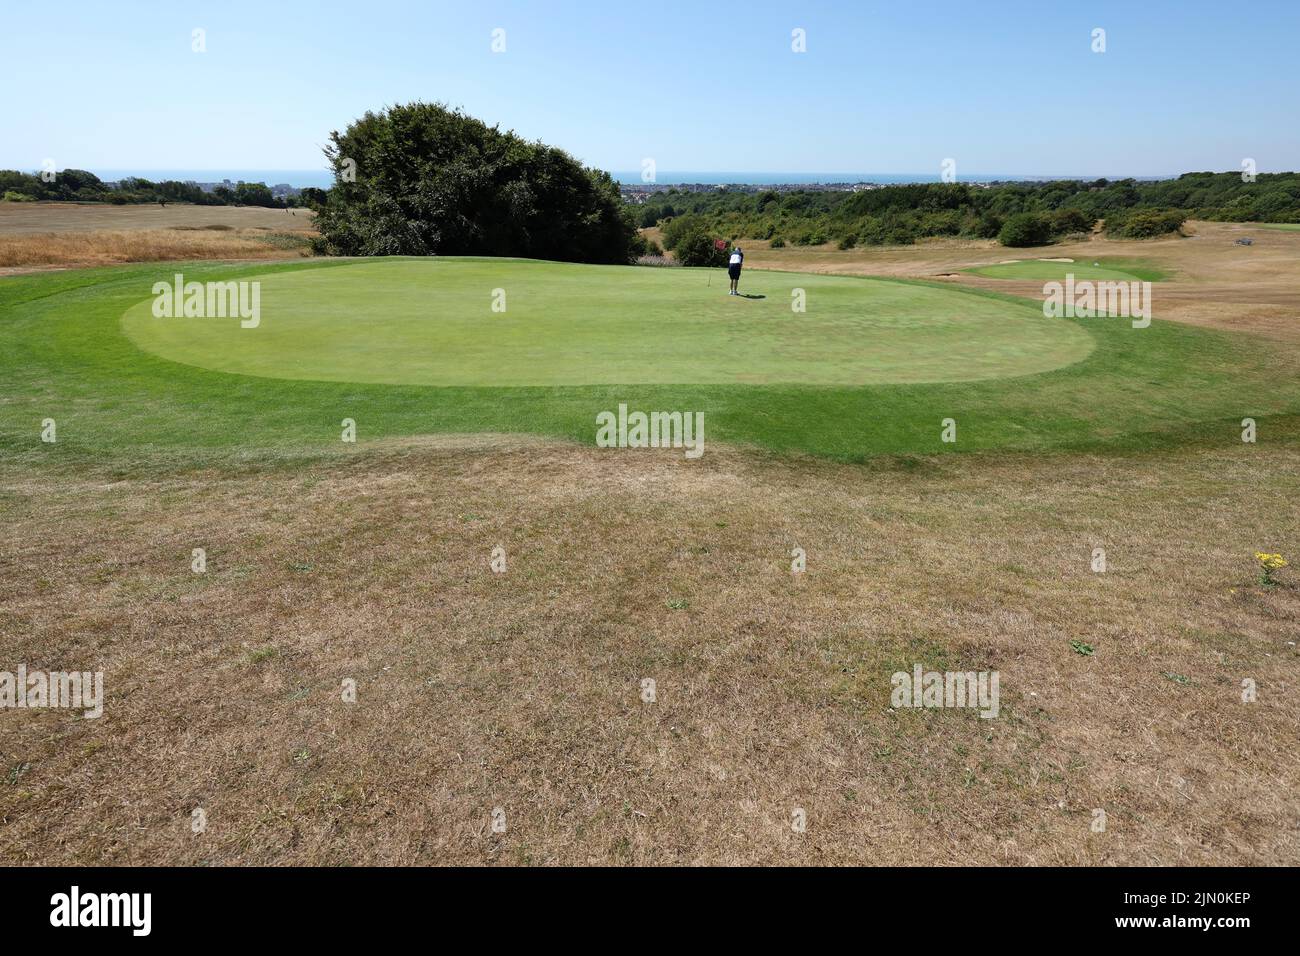 Brighton, UK. 8th Aug, 2022. Golfers putting on a lush green surrounded by scorched fairways as the temperatures continue to soar and hosepipe bans come into force around the country. Credit: James Boardman/Alamy Live News Stock Photo